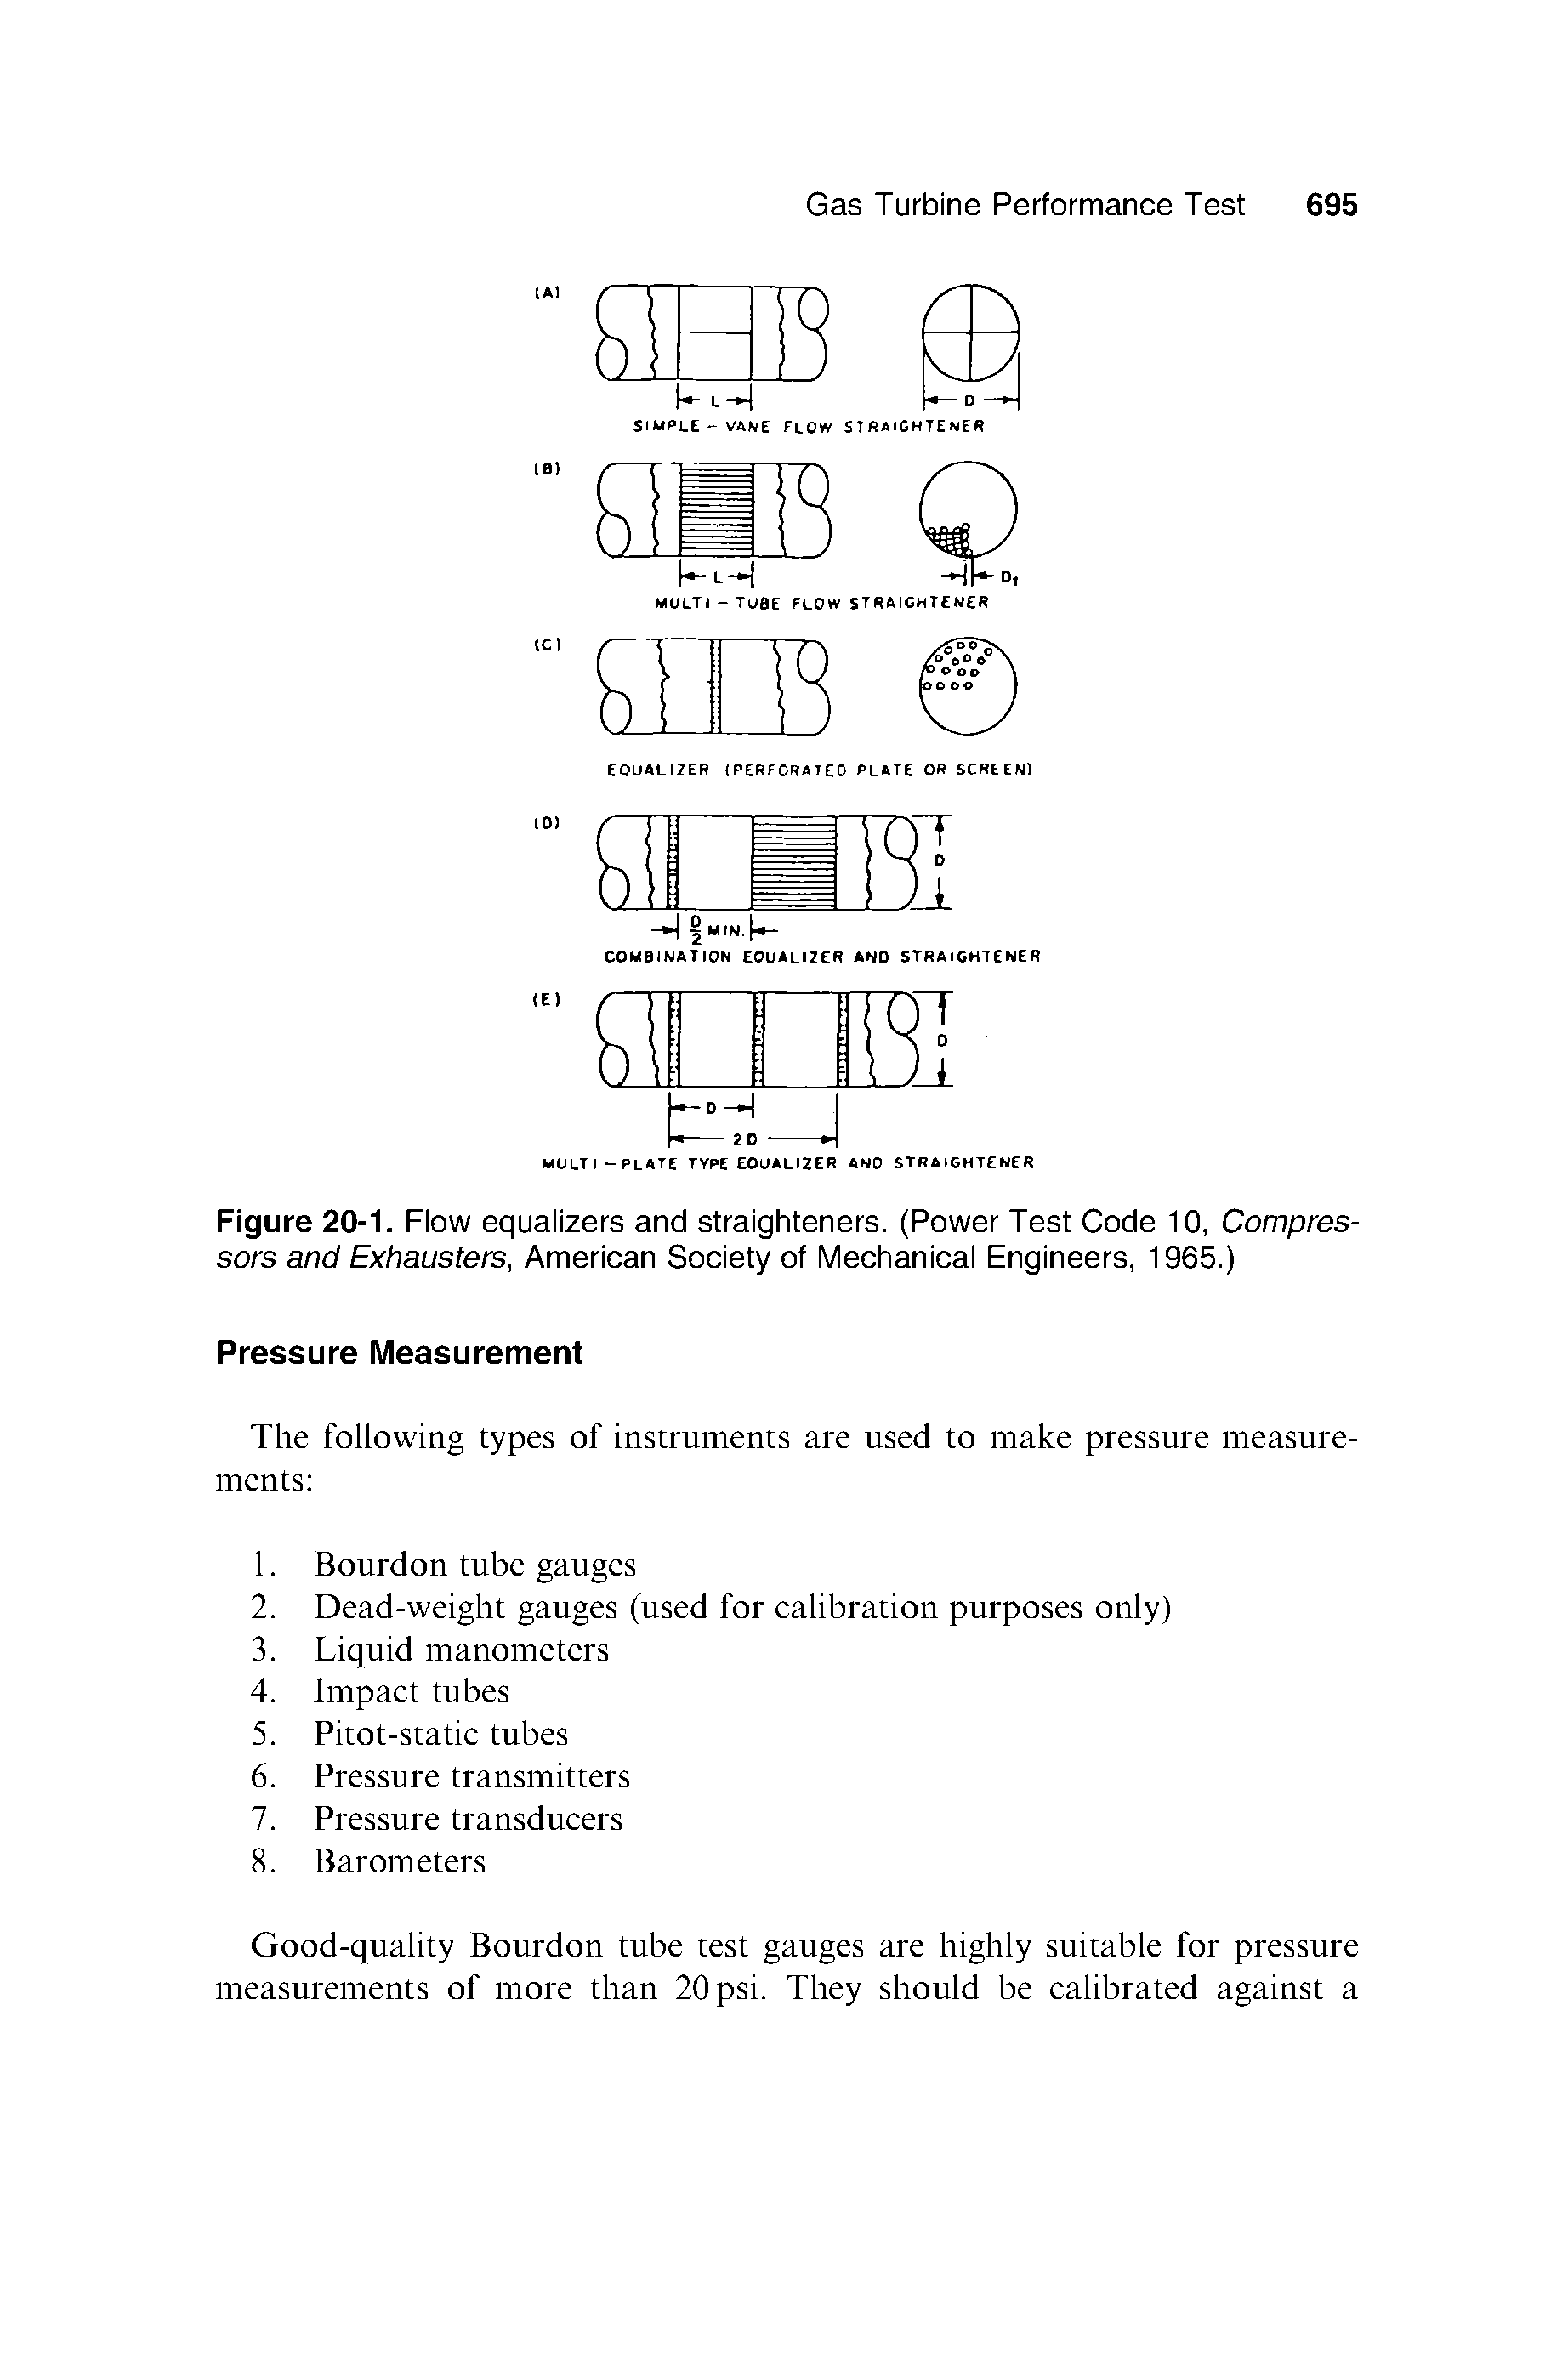 Figure 20-1. Flow equalizers and straighteners. (Power Test Code 10, Compressors and Exhausters, American Society of Mechanical Engineers, 1965.)...